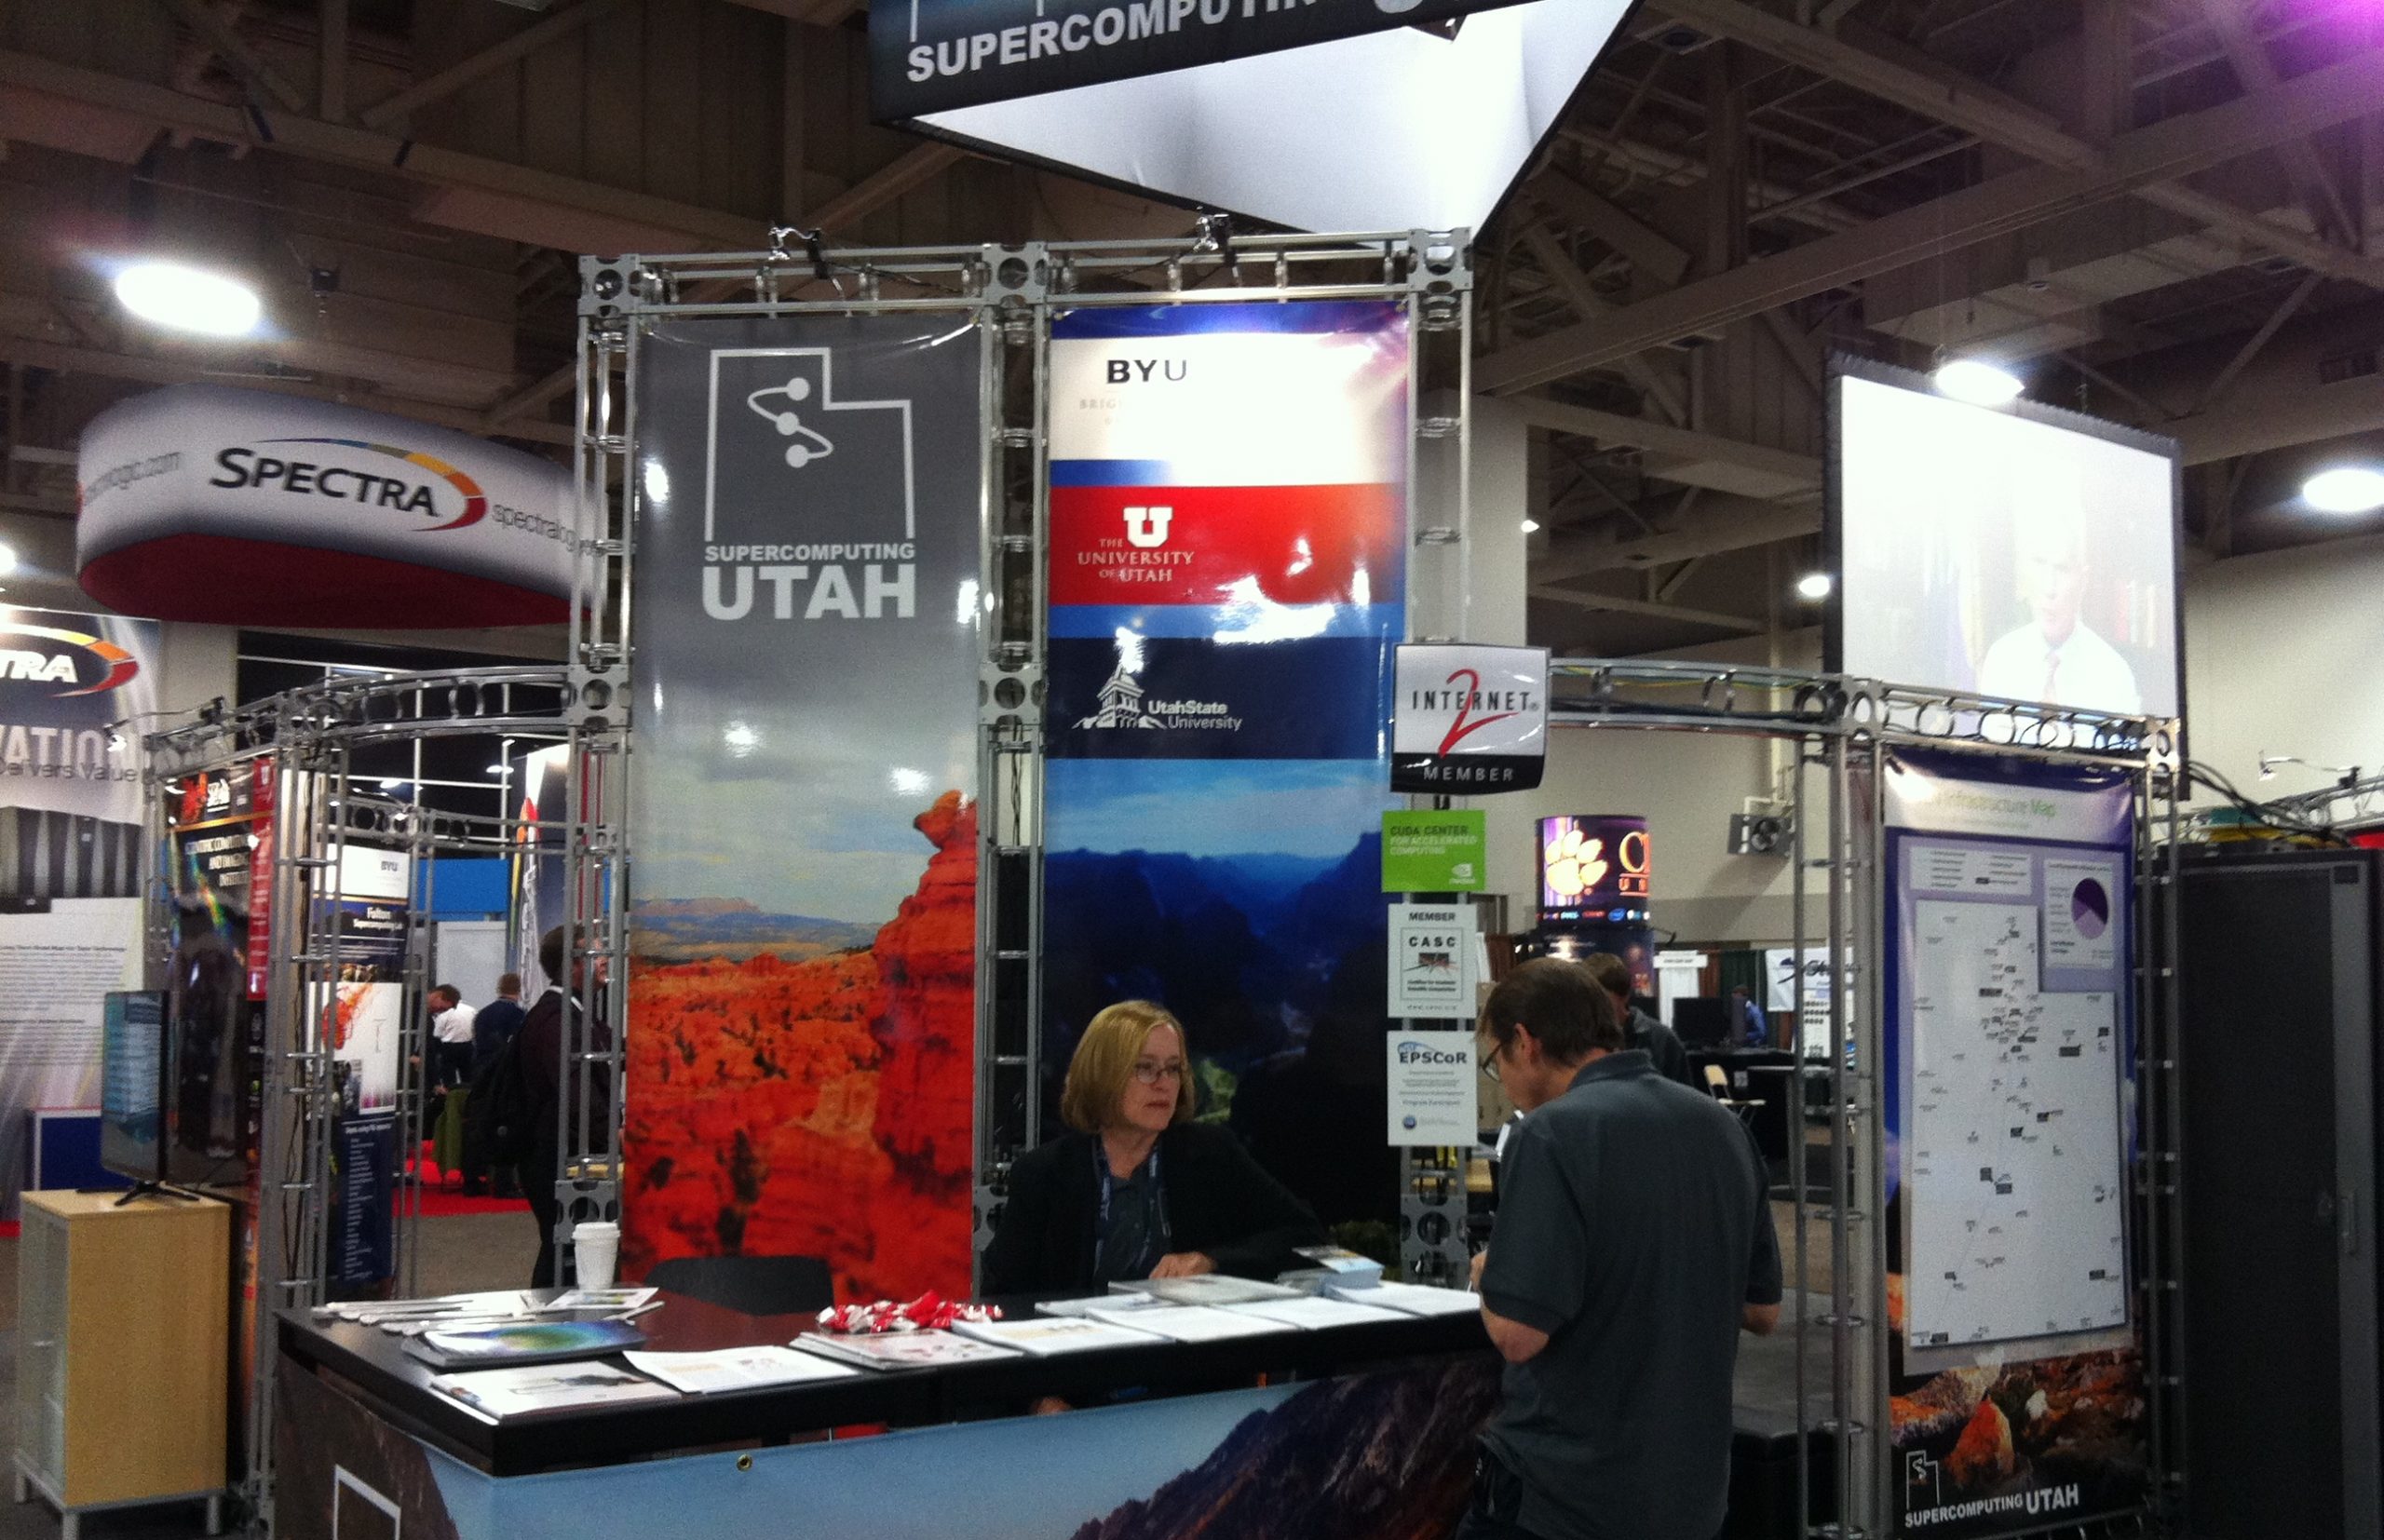 Featured image for “Salt Lake City Hosts Super Computing Conference”